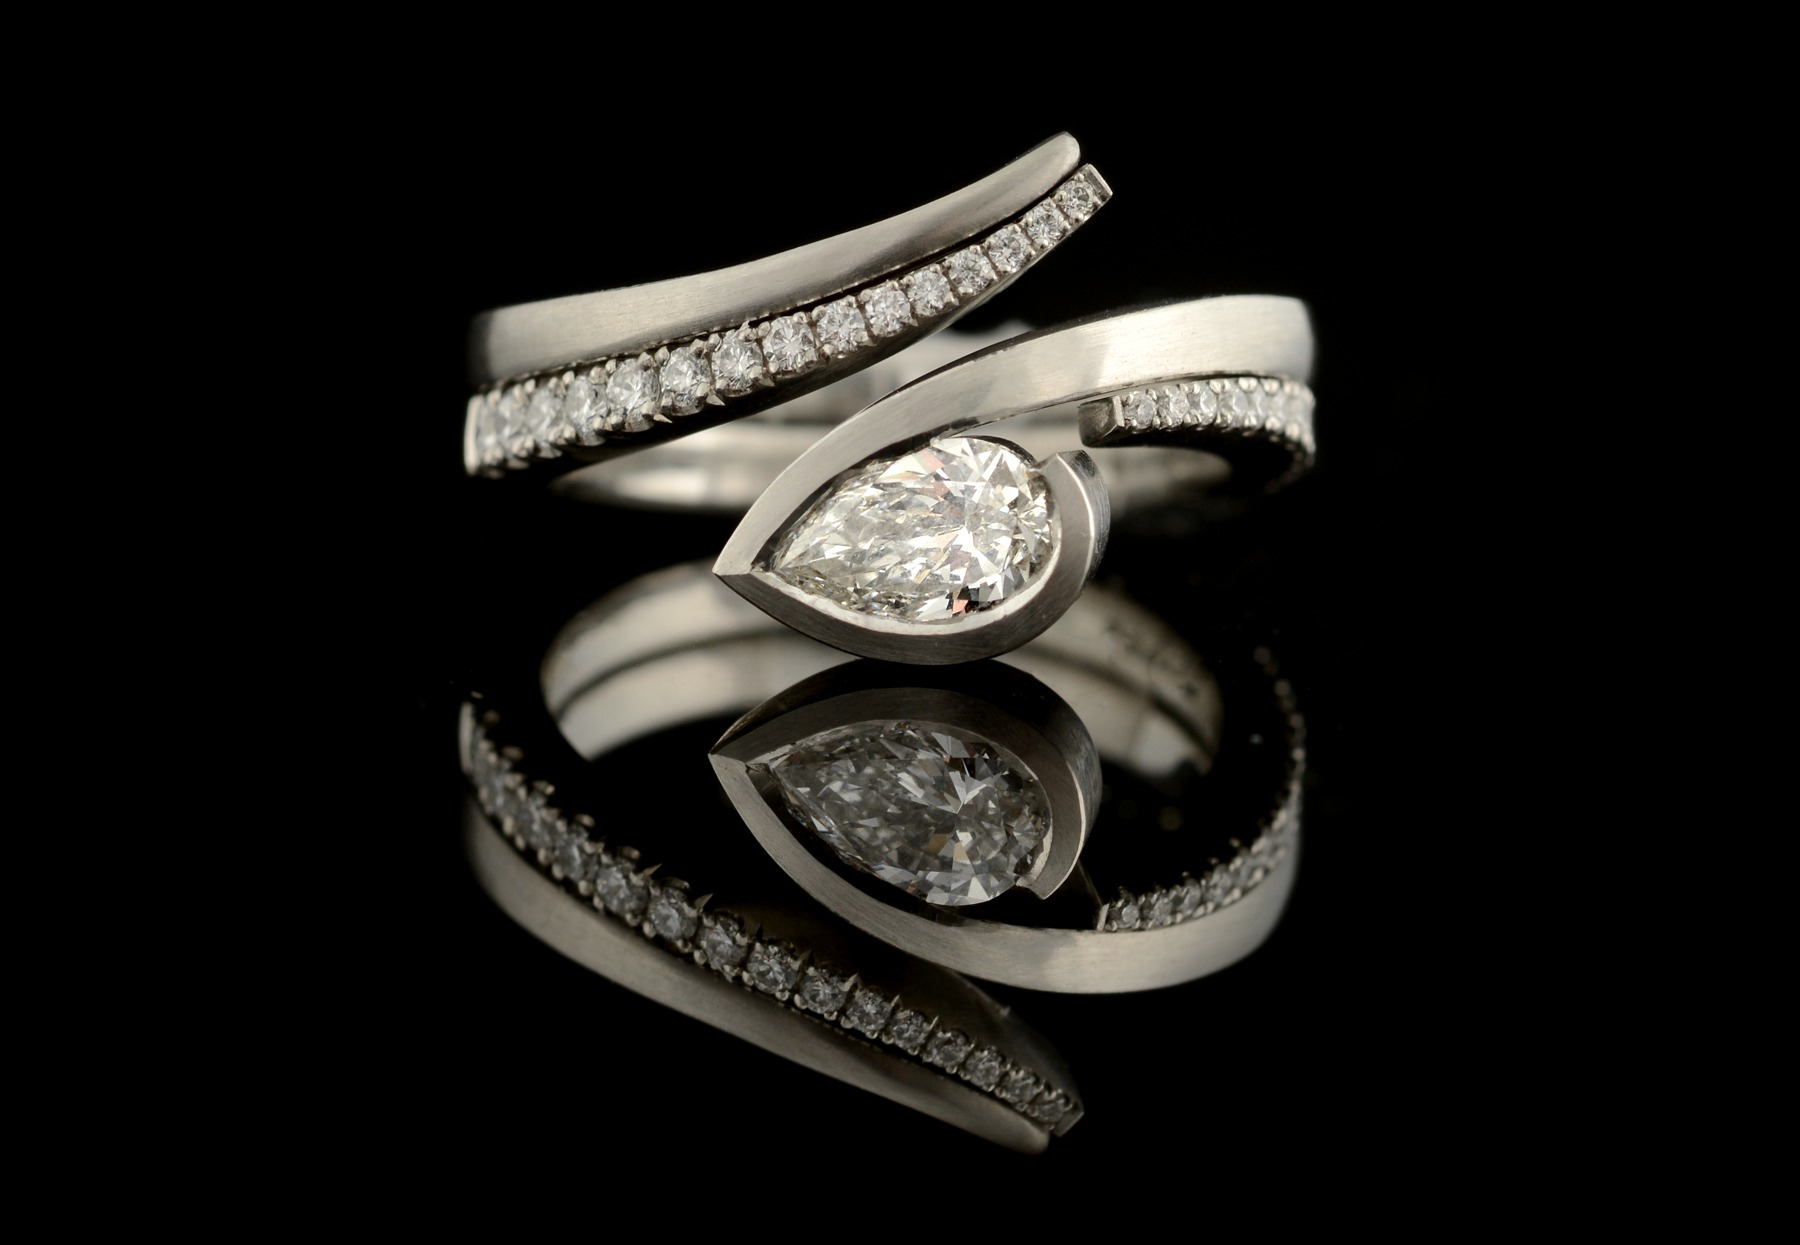 Platinum and diamond Twist engagement ring with fitted diamond wedding band